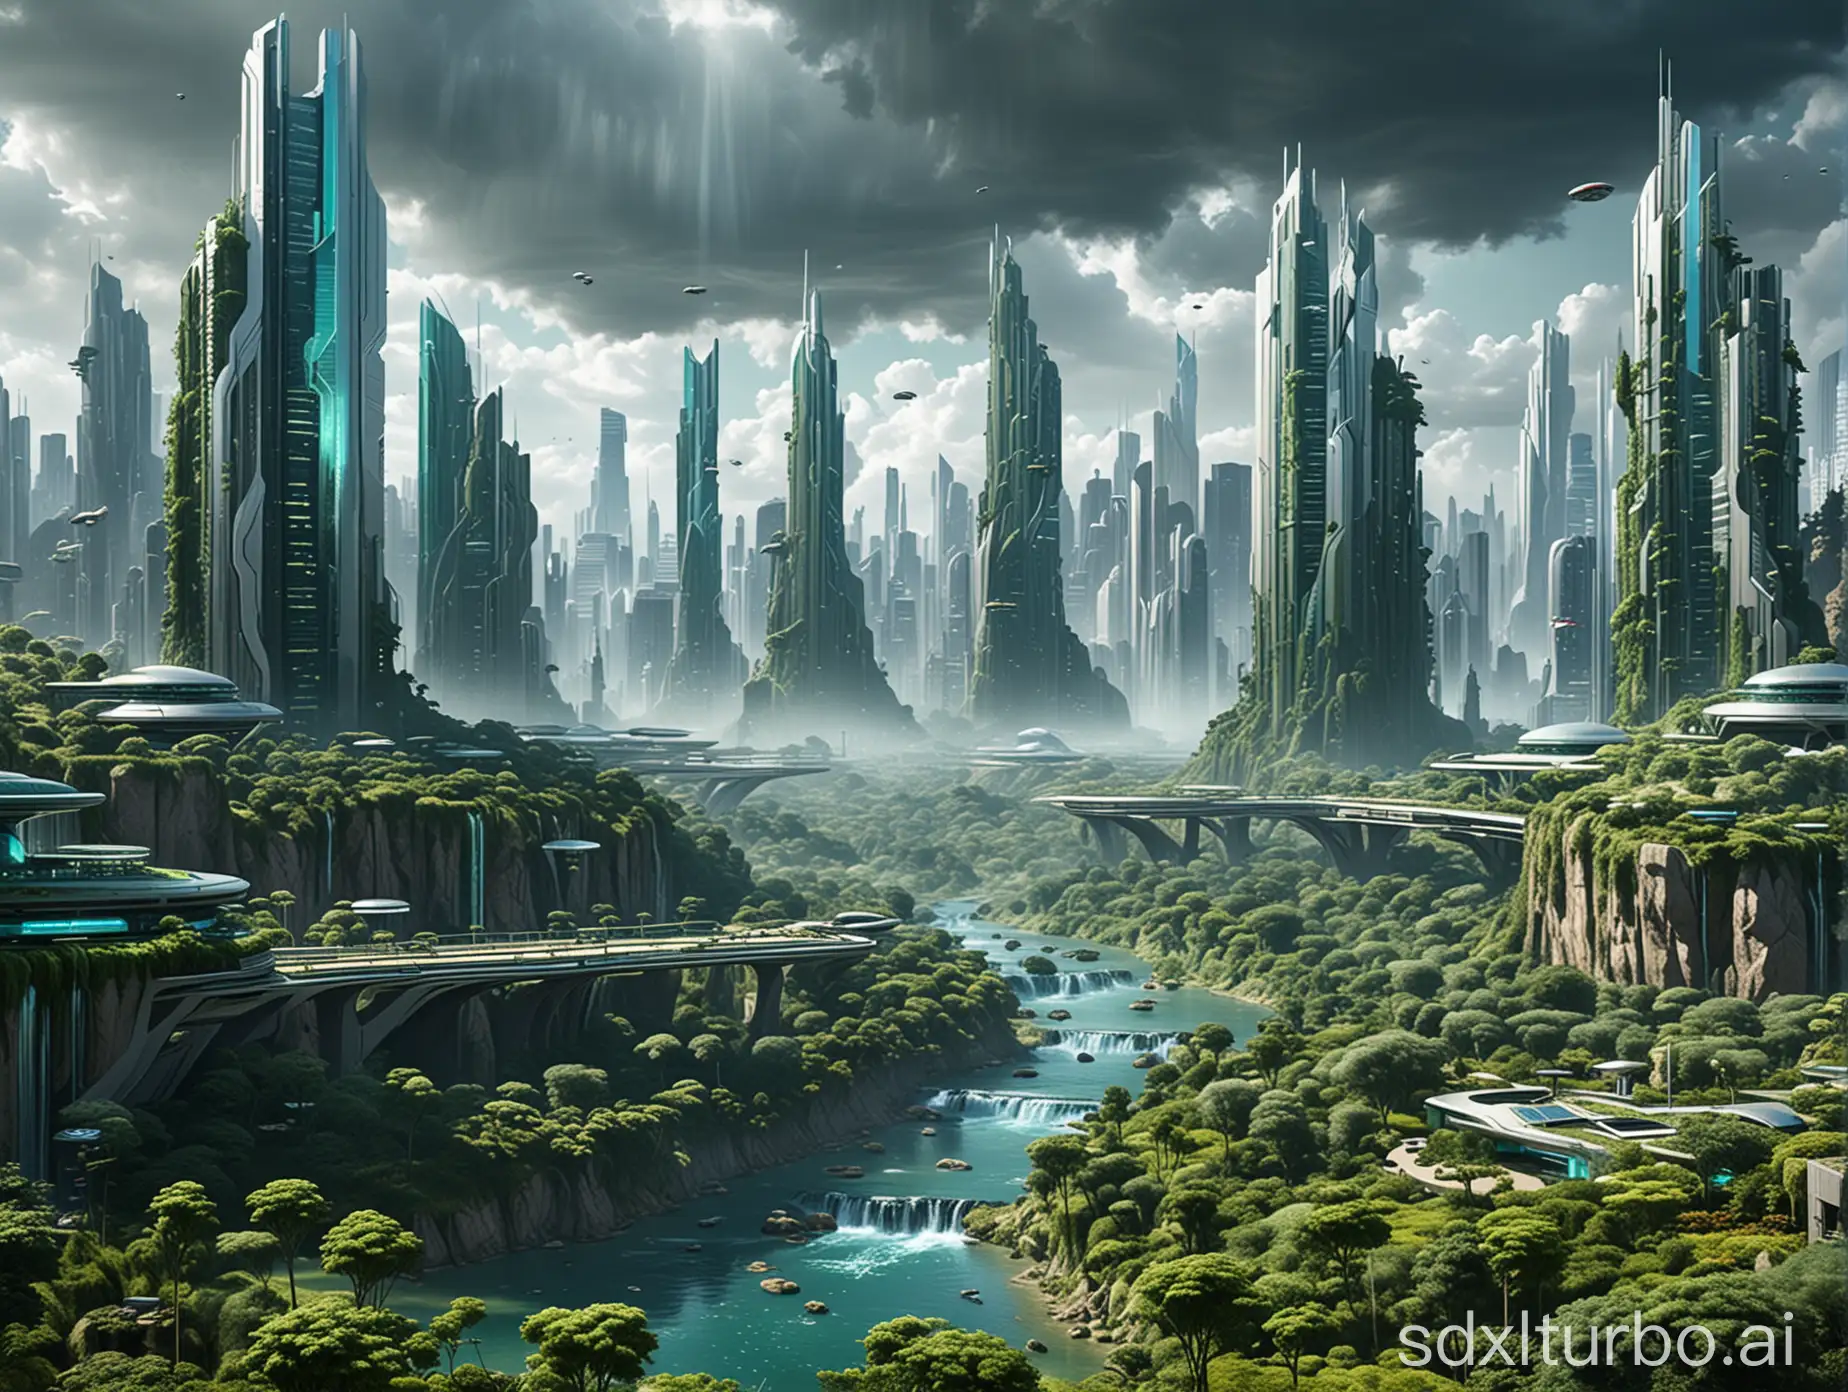 Futuristic-SciFi-Cityscape-with-Holographic-Waterfalls-and-Green-Belts